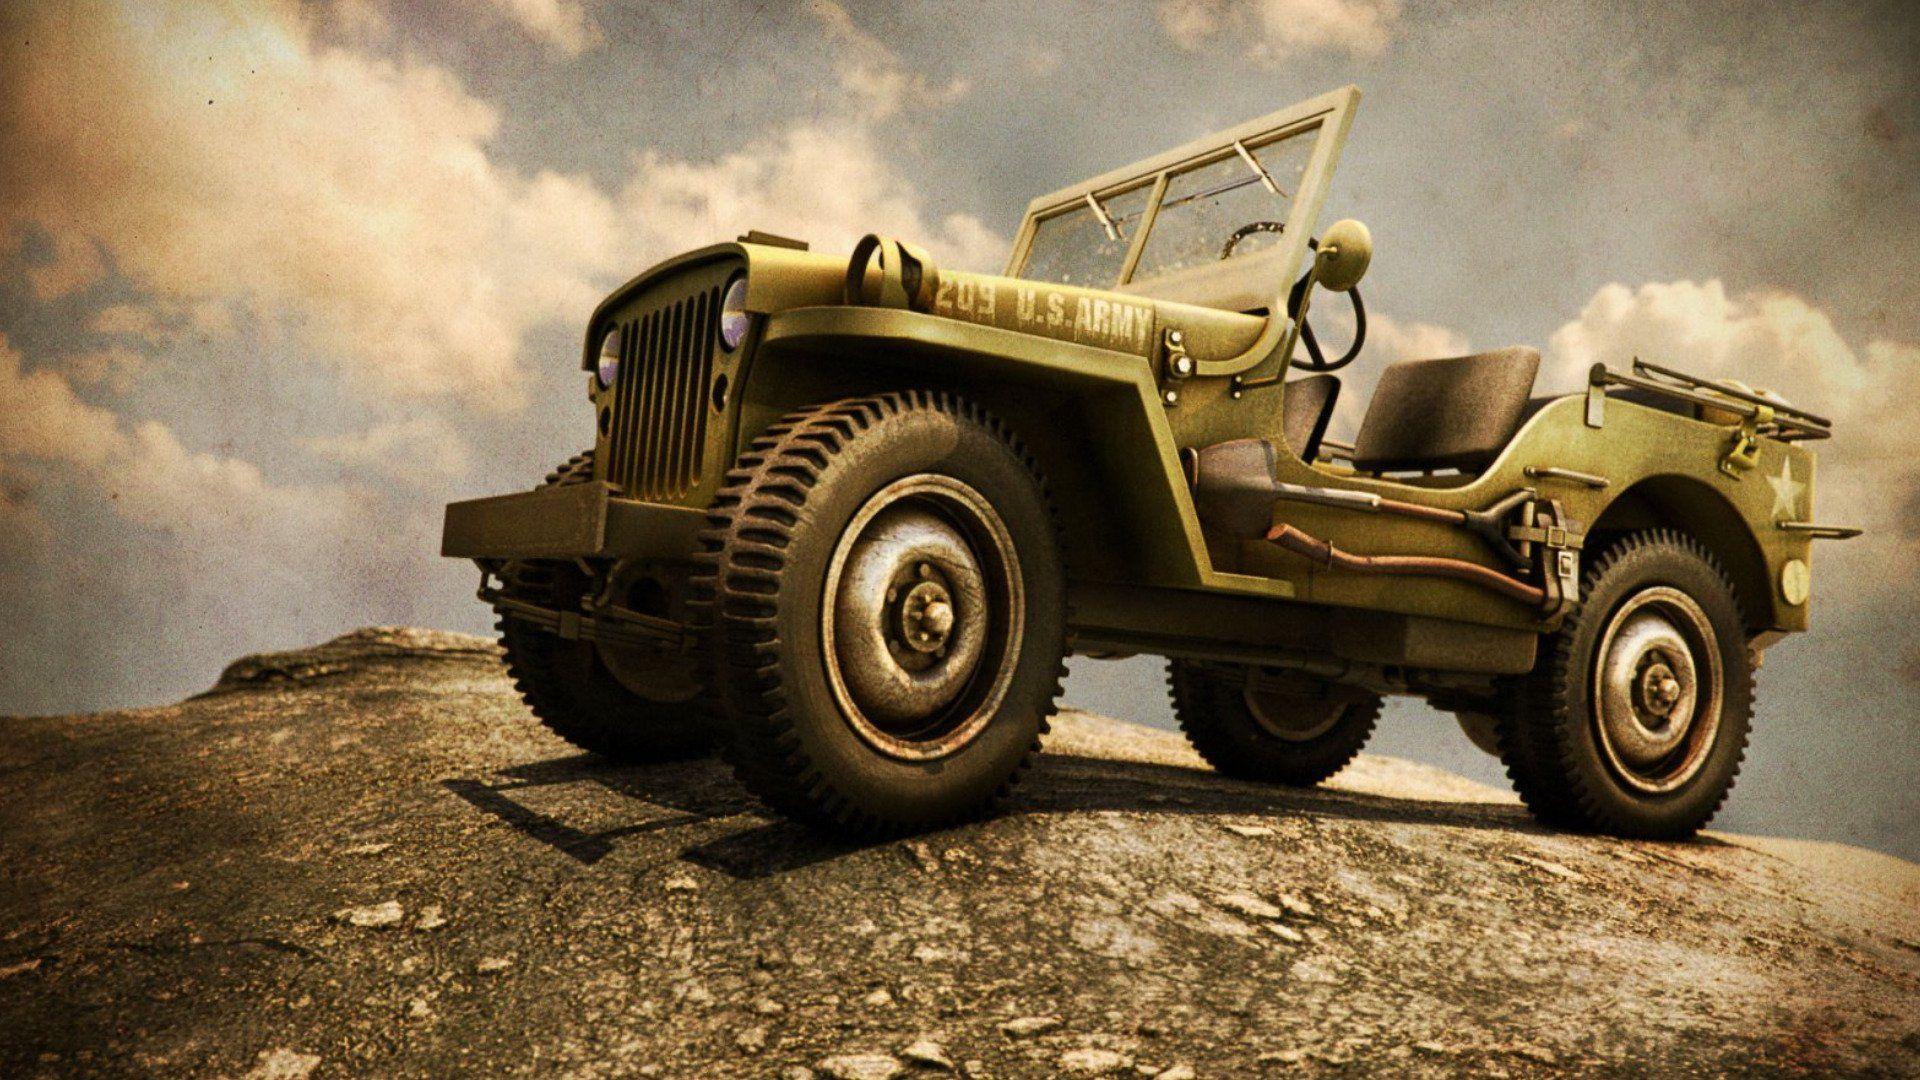 Military Vehicles HD Wallpaper and Background Image